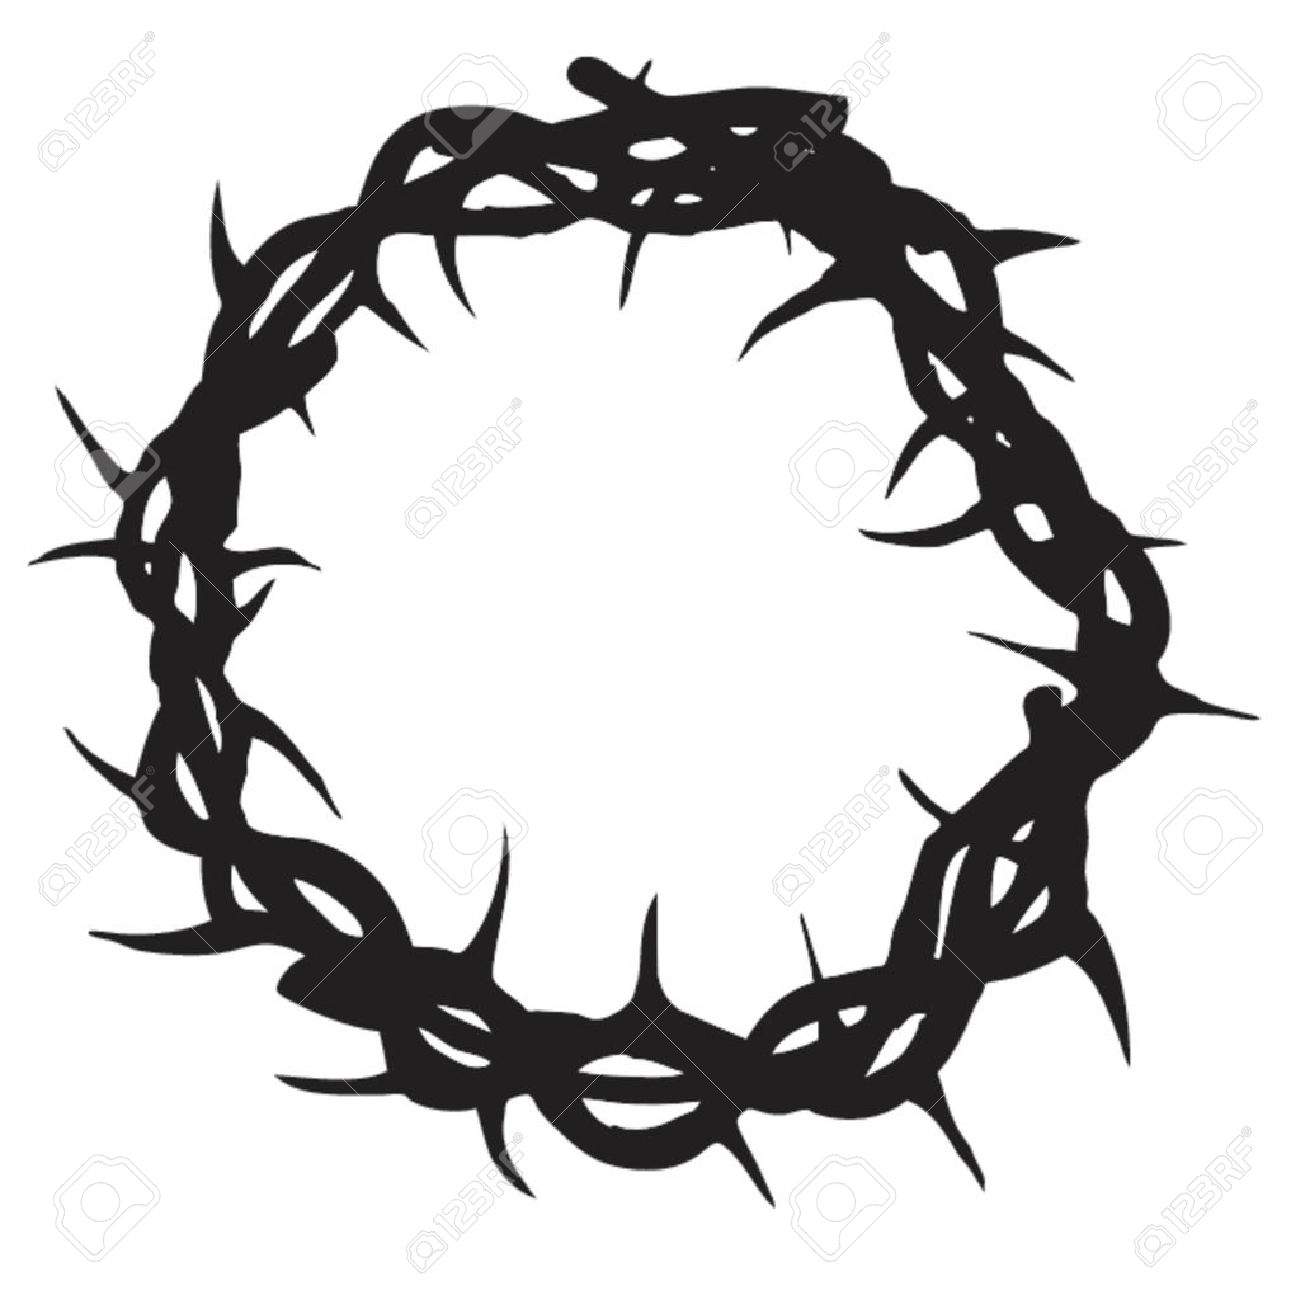 Search results for crown of t - Crown Of Thorns Clipart